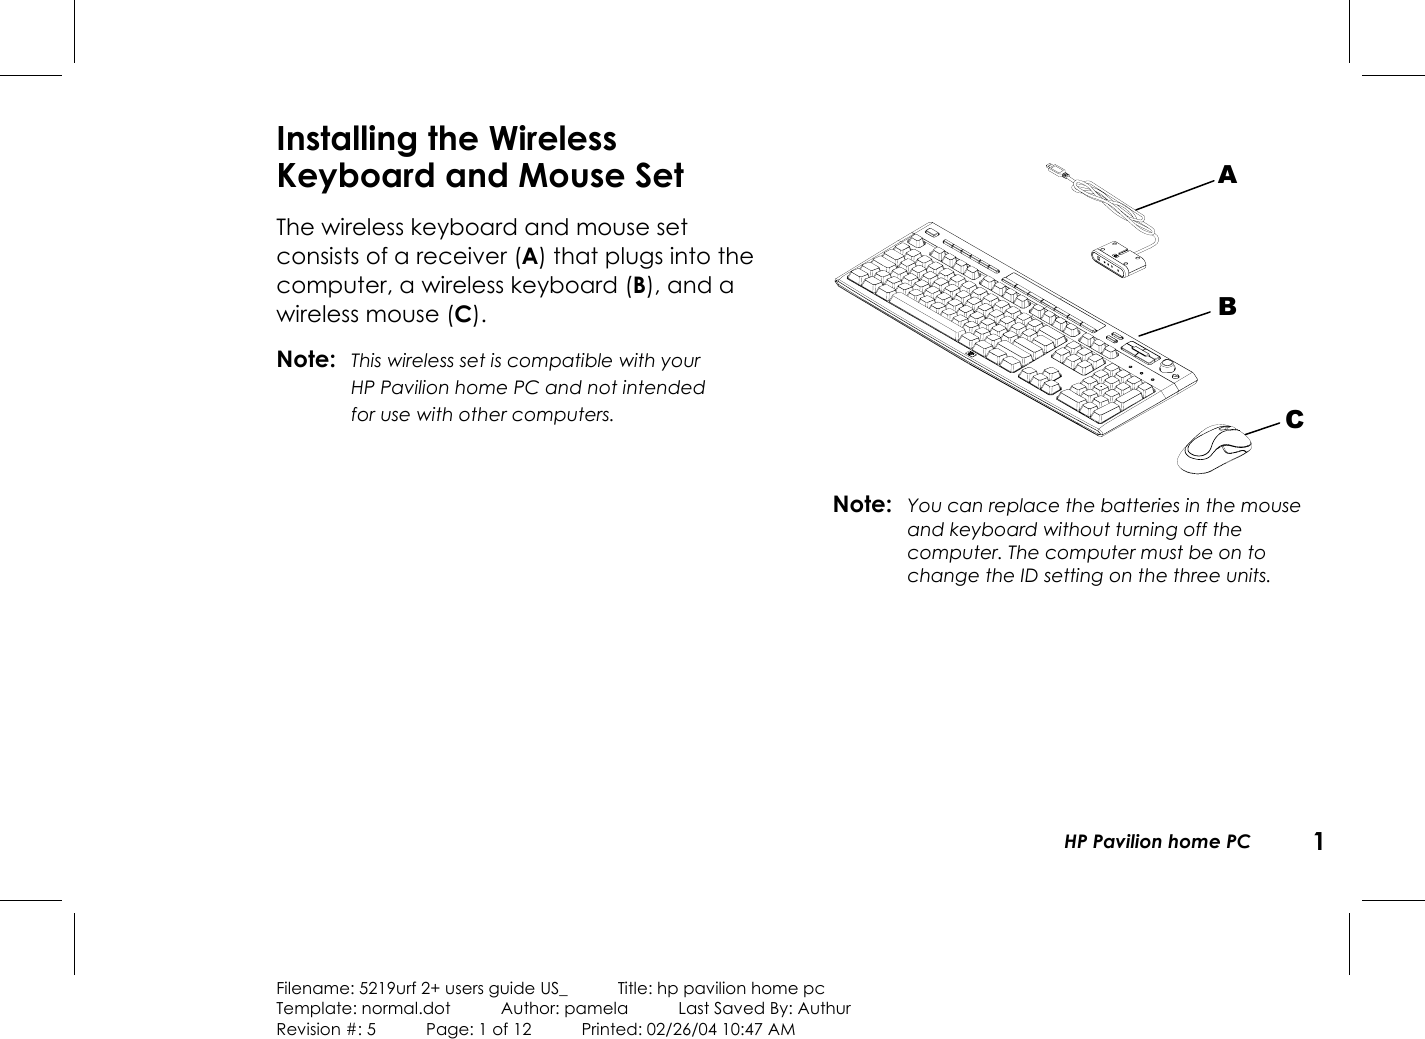 HP Pavilion home PC 1Filename: 5219urf 2+ users guide US_            Title: hp pavilion home pcTemplate: normal.dot      Author: pamela      Last Saved By: AuthurRevision #: 5      Page: 1 of 12      Printed: 02/26/04 10:47 AMInstalling the WirelessKeyboard and Mouse SetThe wireless keyboard and mouse setconsists ofa receiver (A) that plugs into thecomputer, a wireless keyboard (B), and awireless mouse (C).Note: This wireless set is compatible with yourHPPavilion home PC and not intendedforusewithother computers.Note: You can replace the batteries in the mouseandkeyboard without turning off thecomputer. The computer must be on tochange the ID setting on the three units.ABC